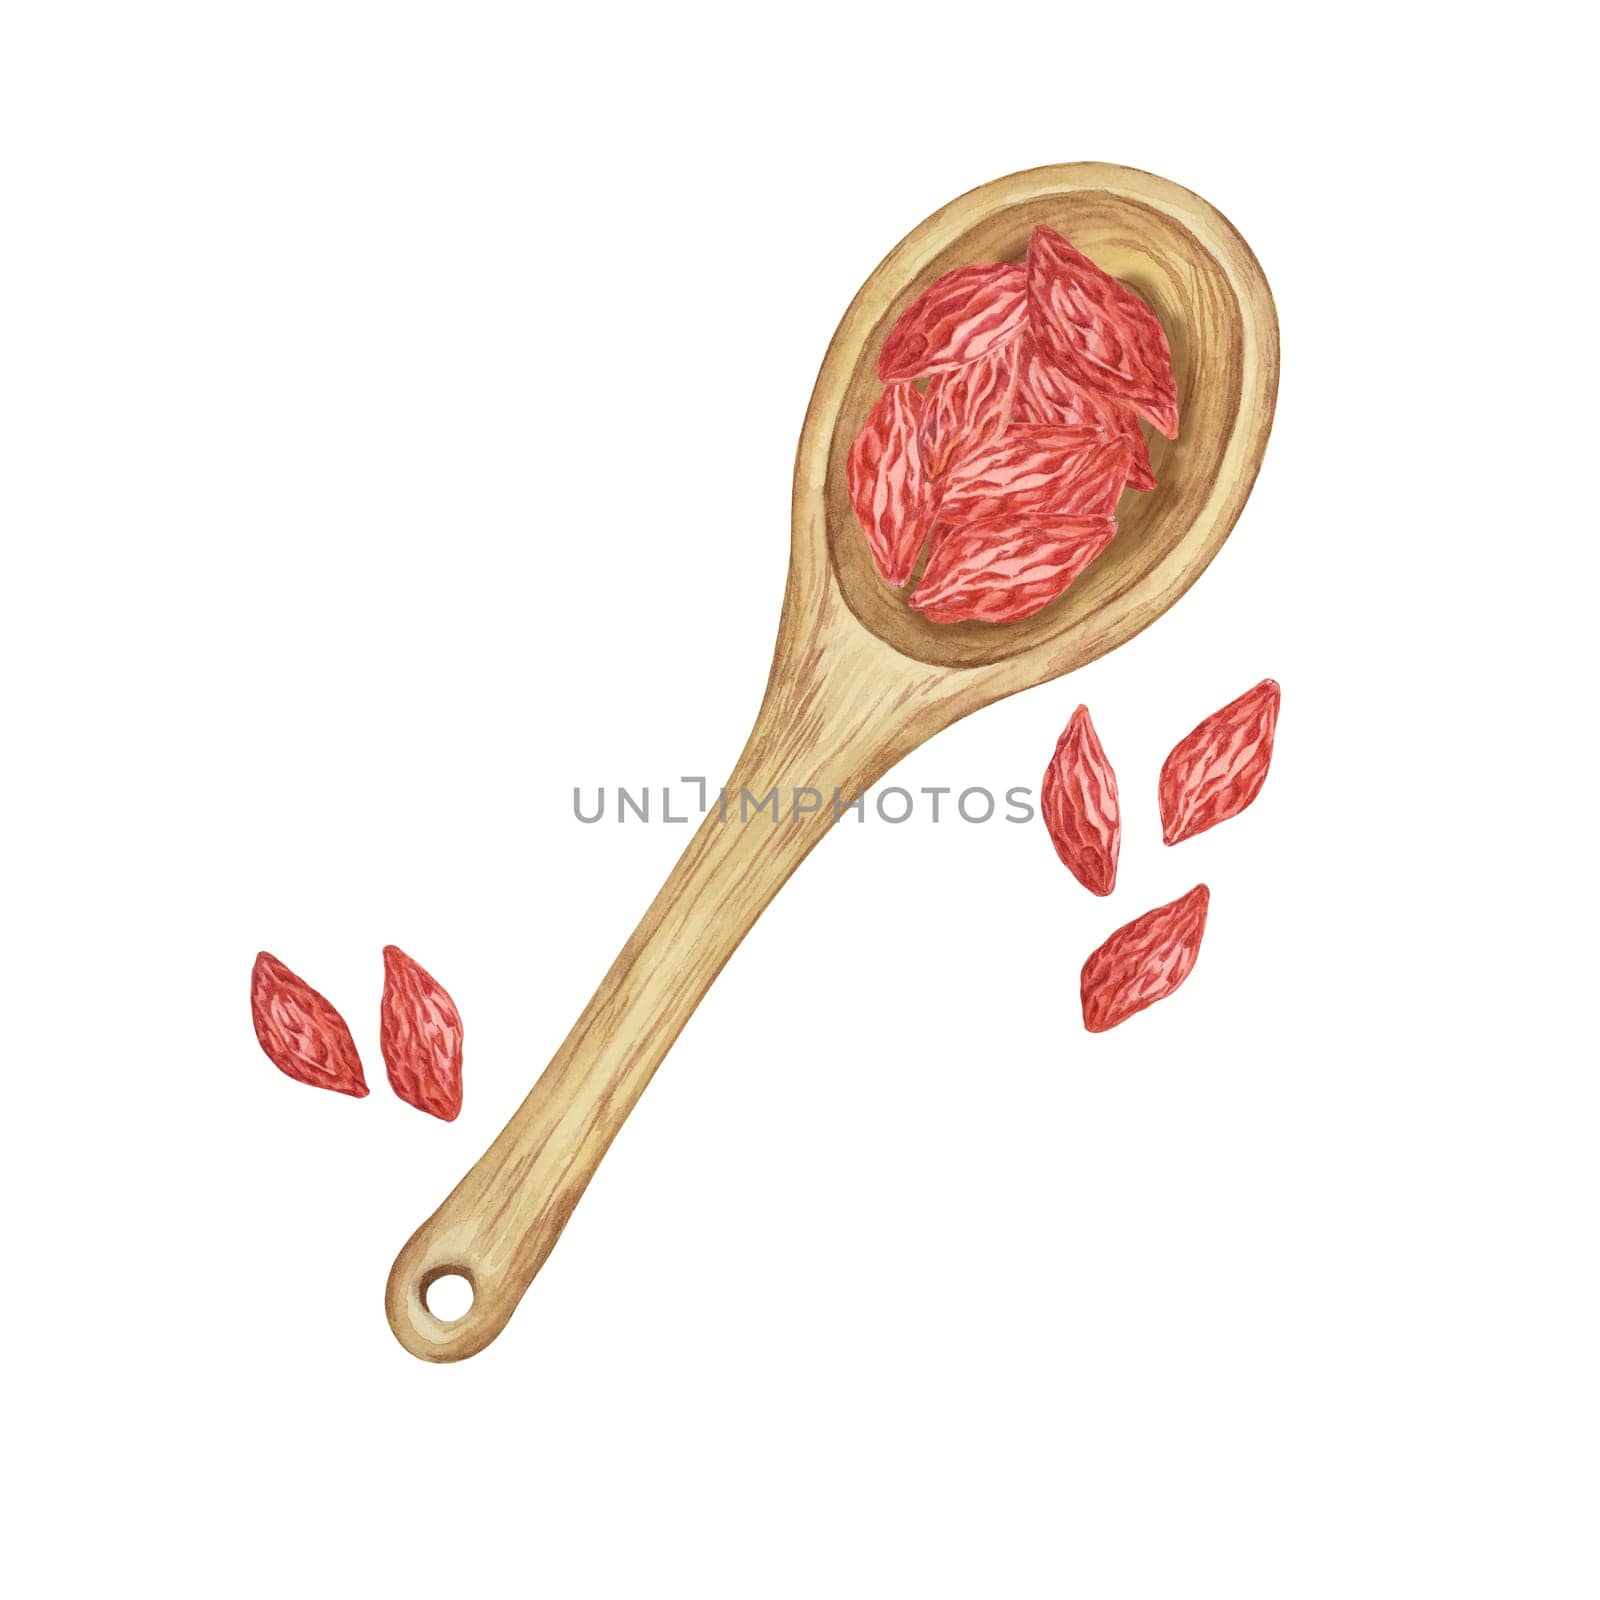 Spoon full with dry goji berries by Fofito